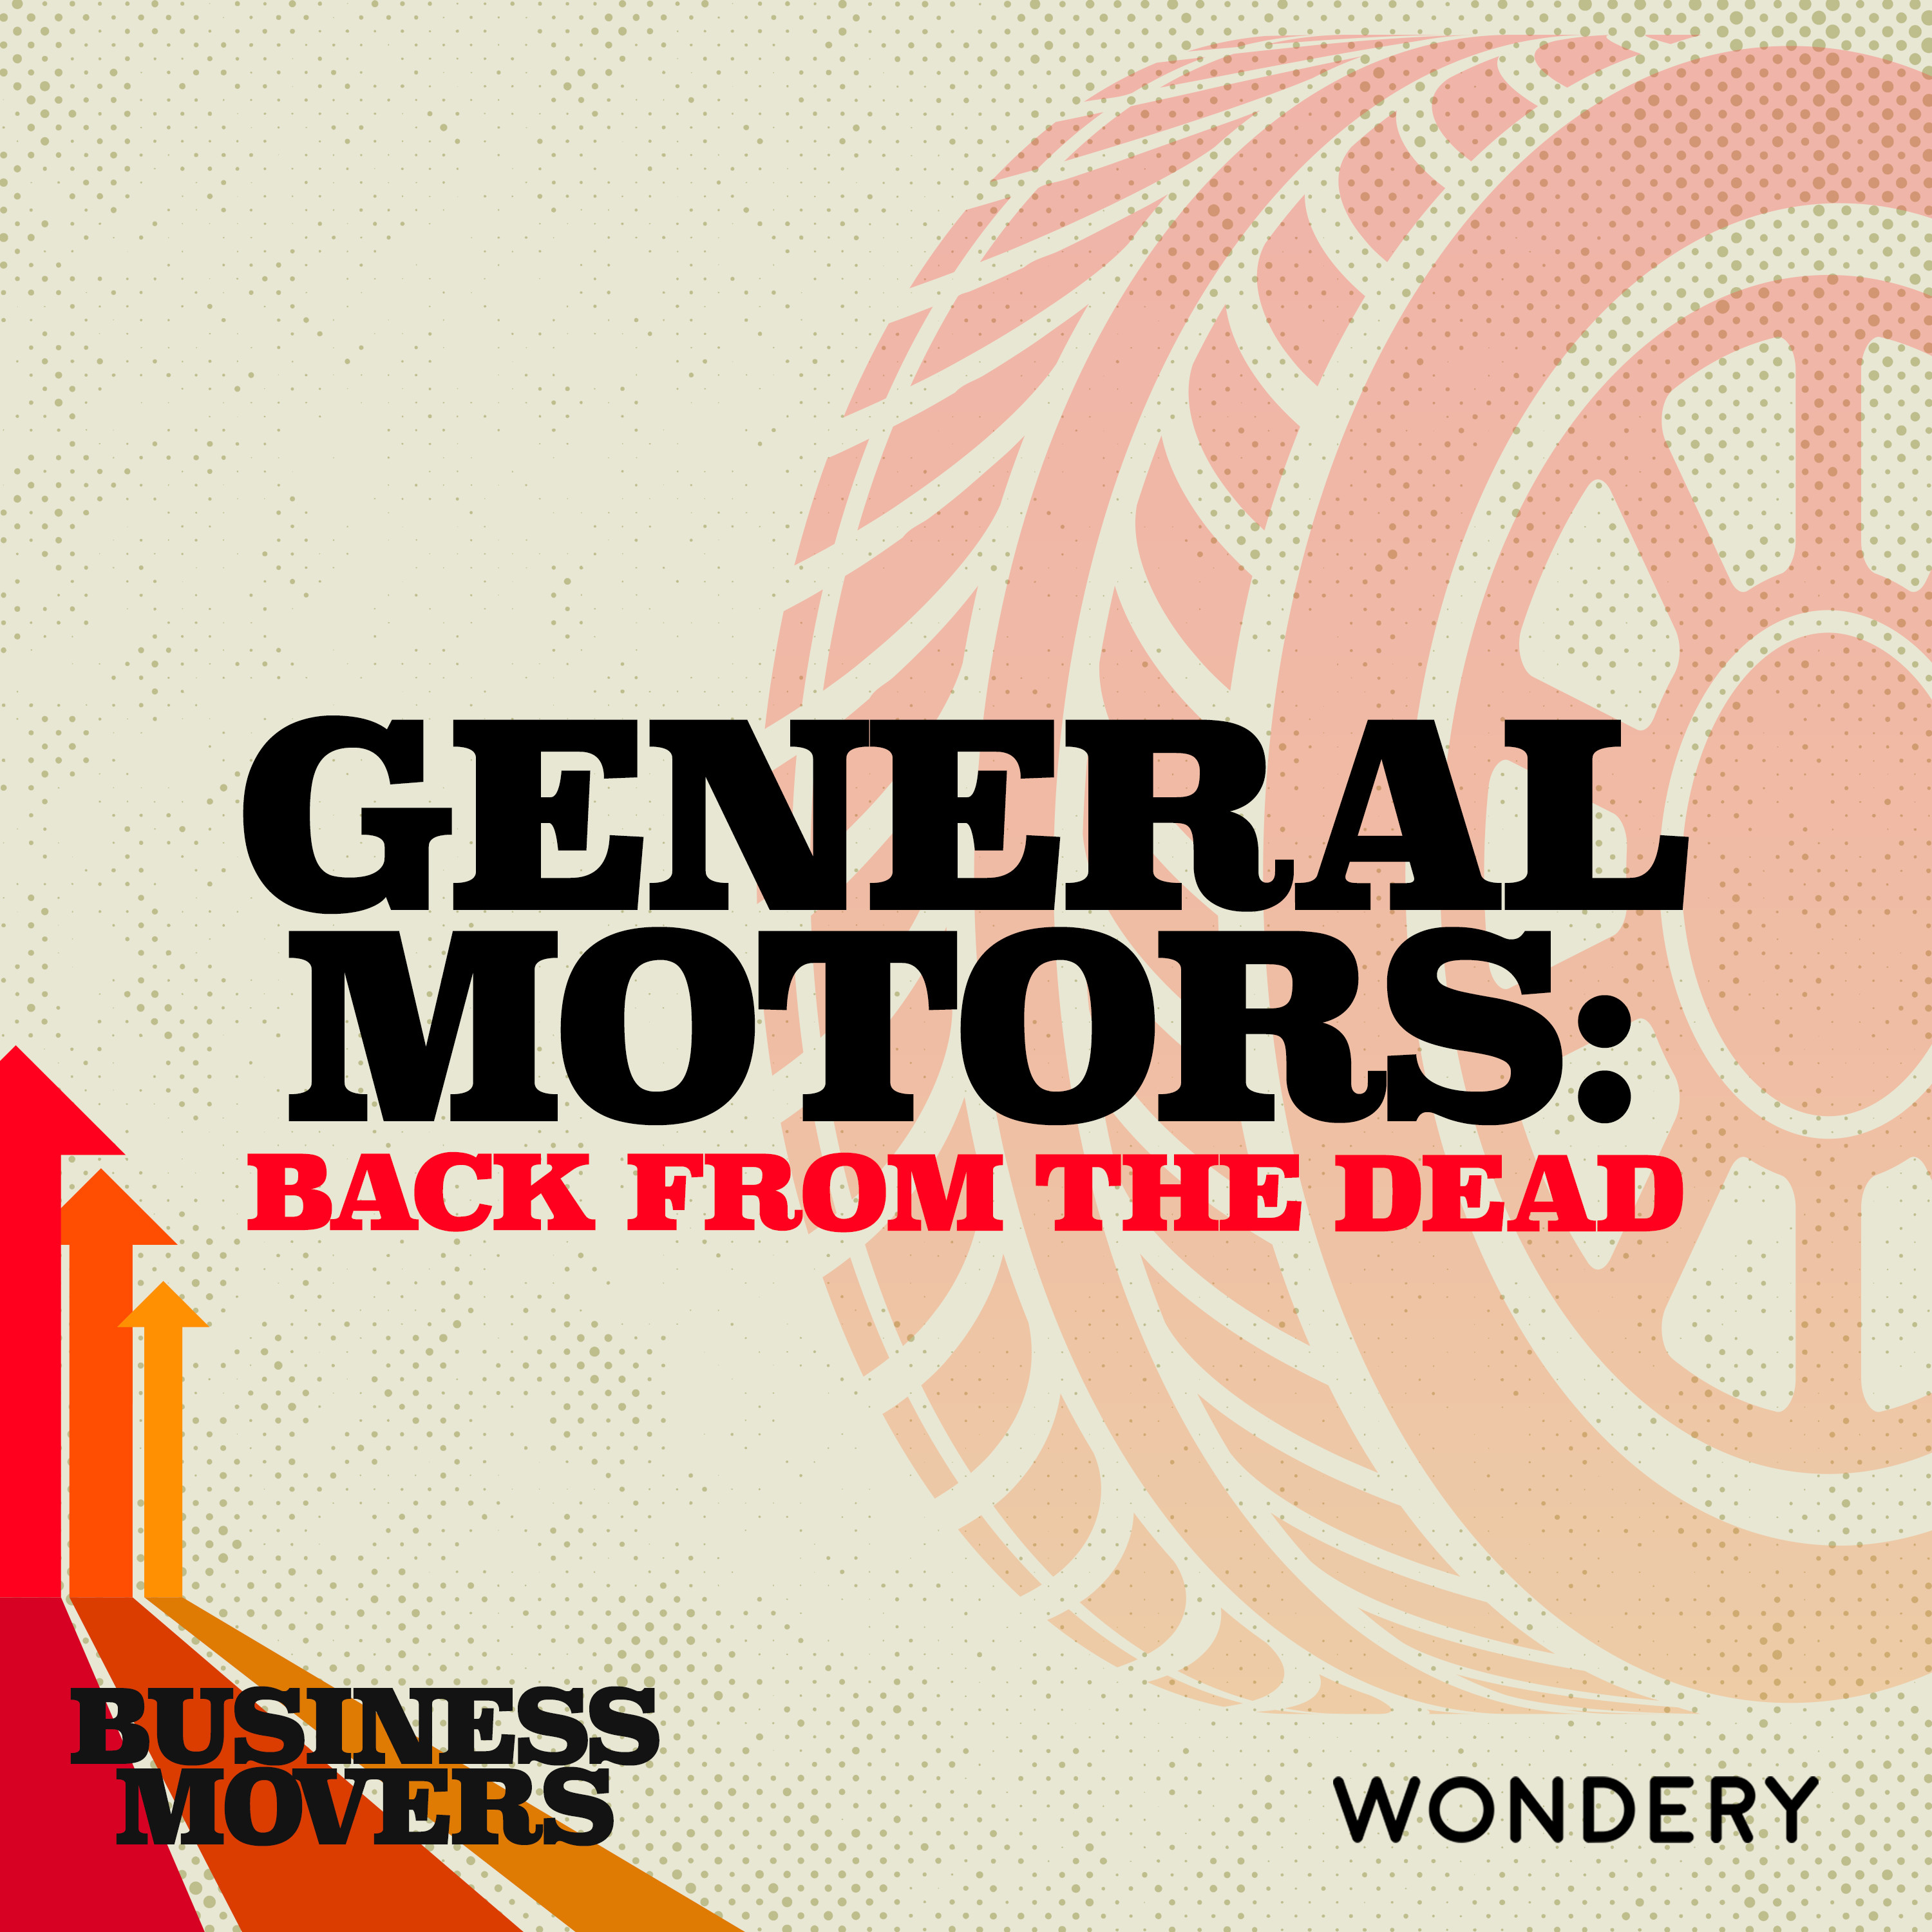 General Motors: Back from the Dead | David Welch Sees General Motors’ Future | 5